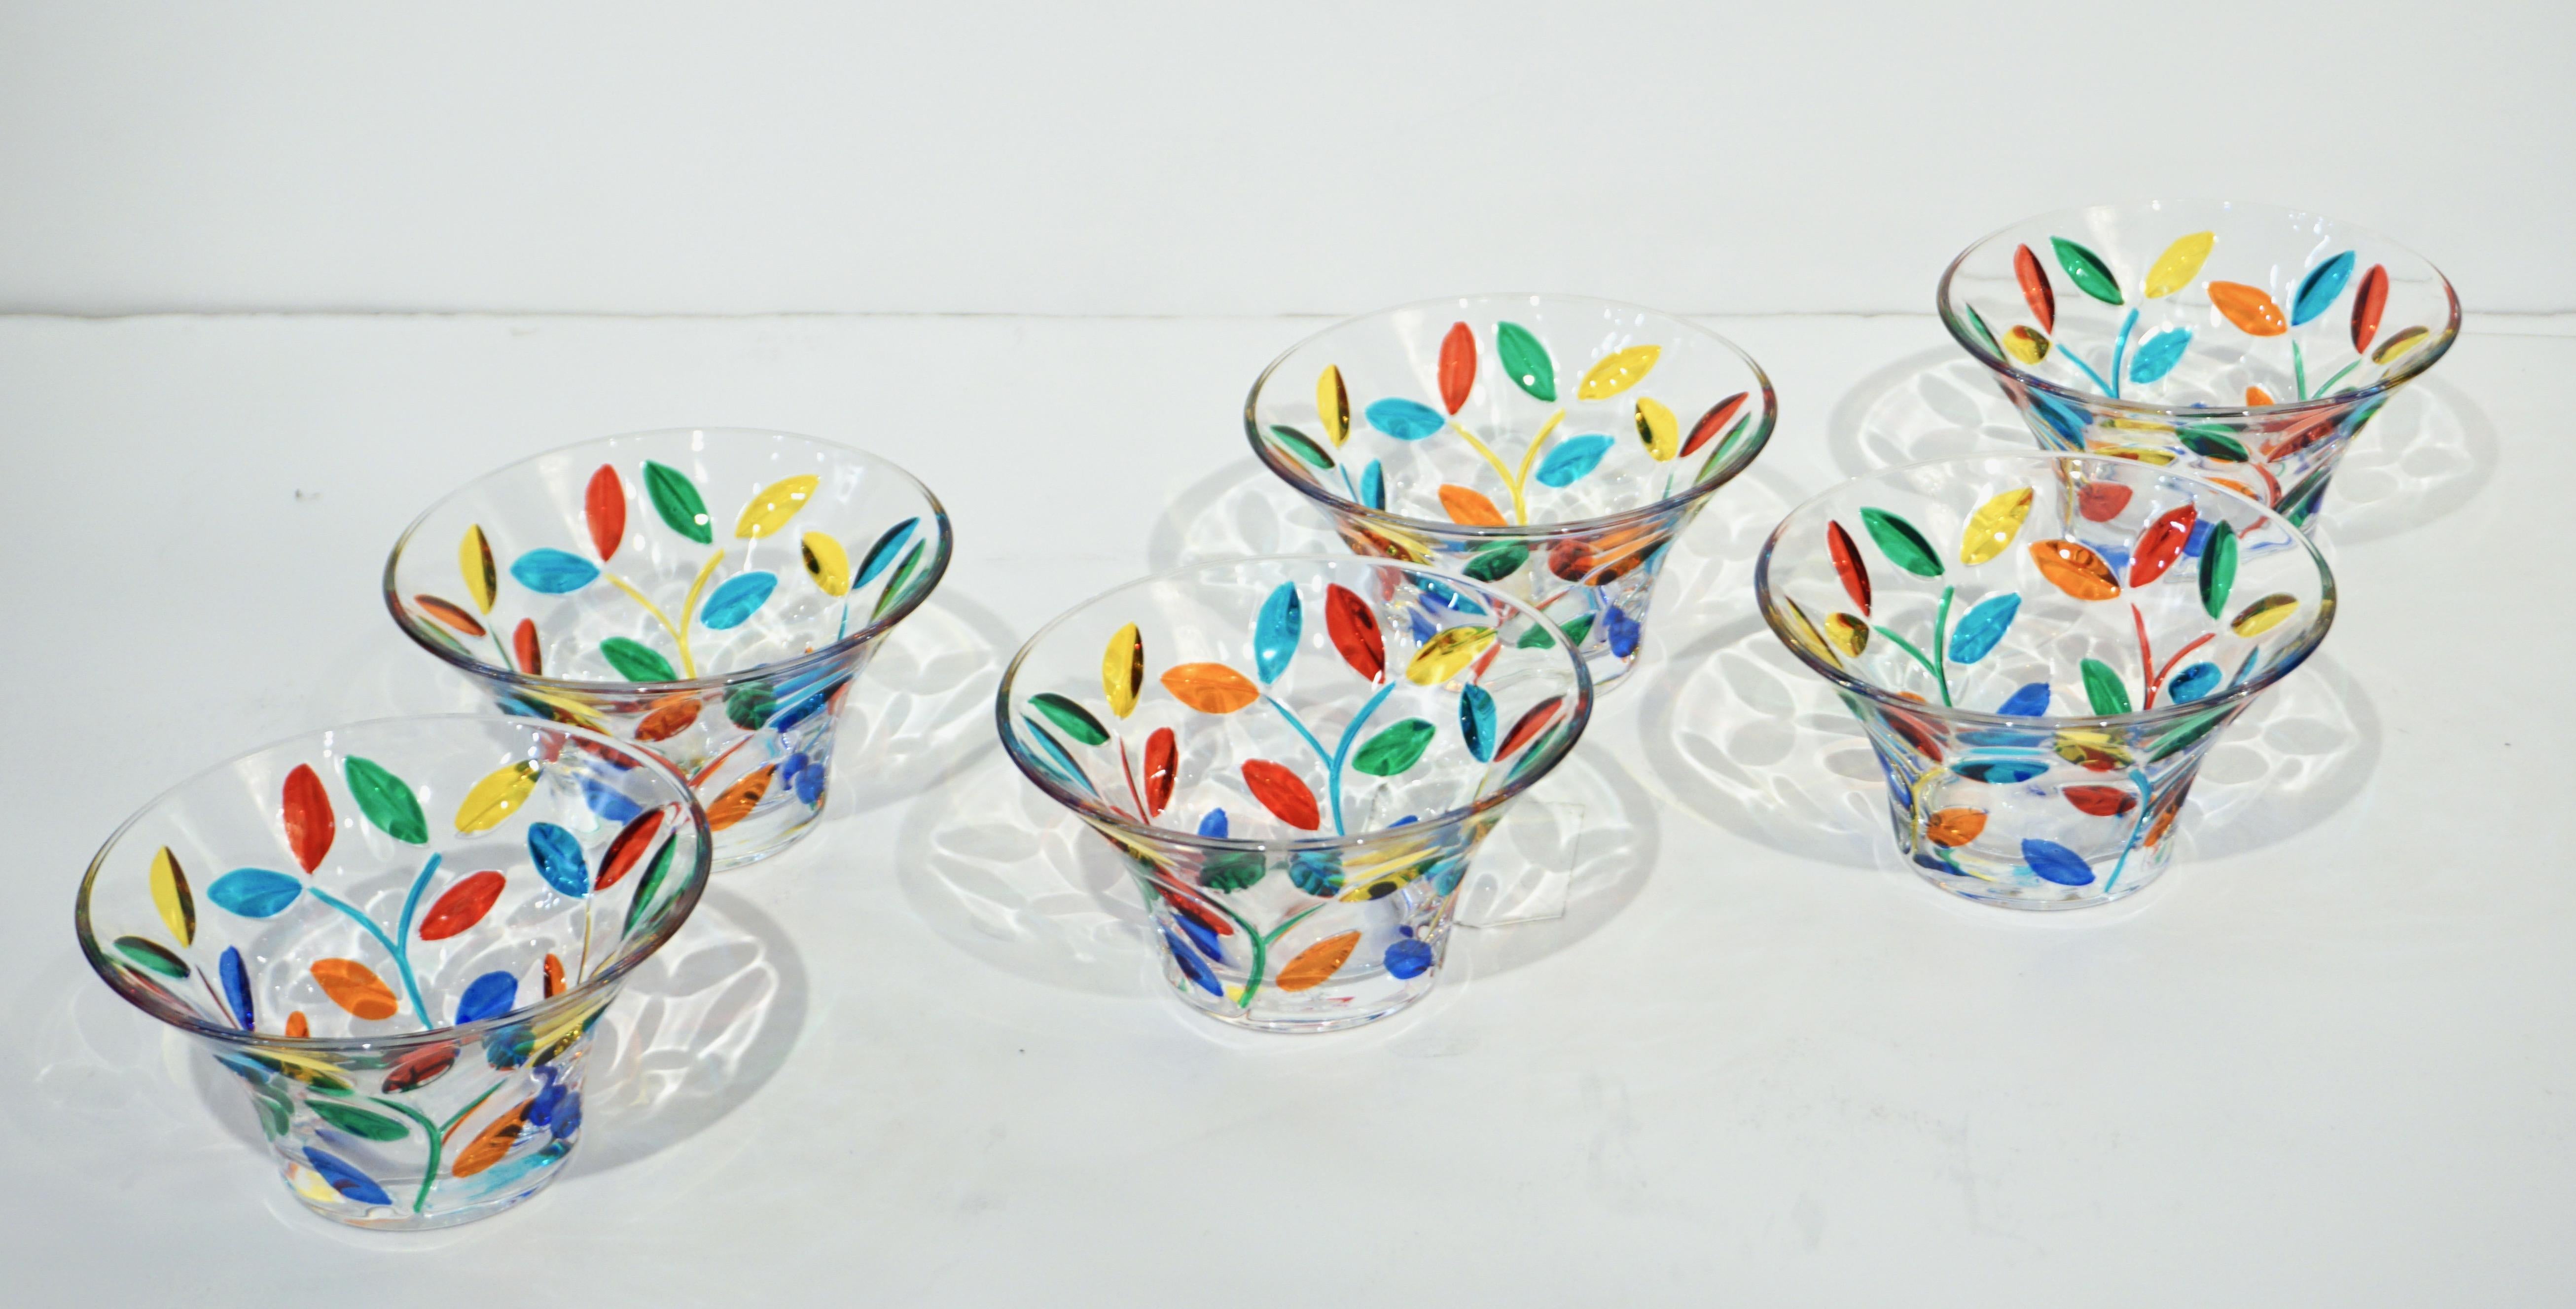 Contemporary Colleoni Modern Set of 6 Crystal Murano Glass Cups / Bowls with Colorful Leaves For Sale